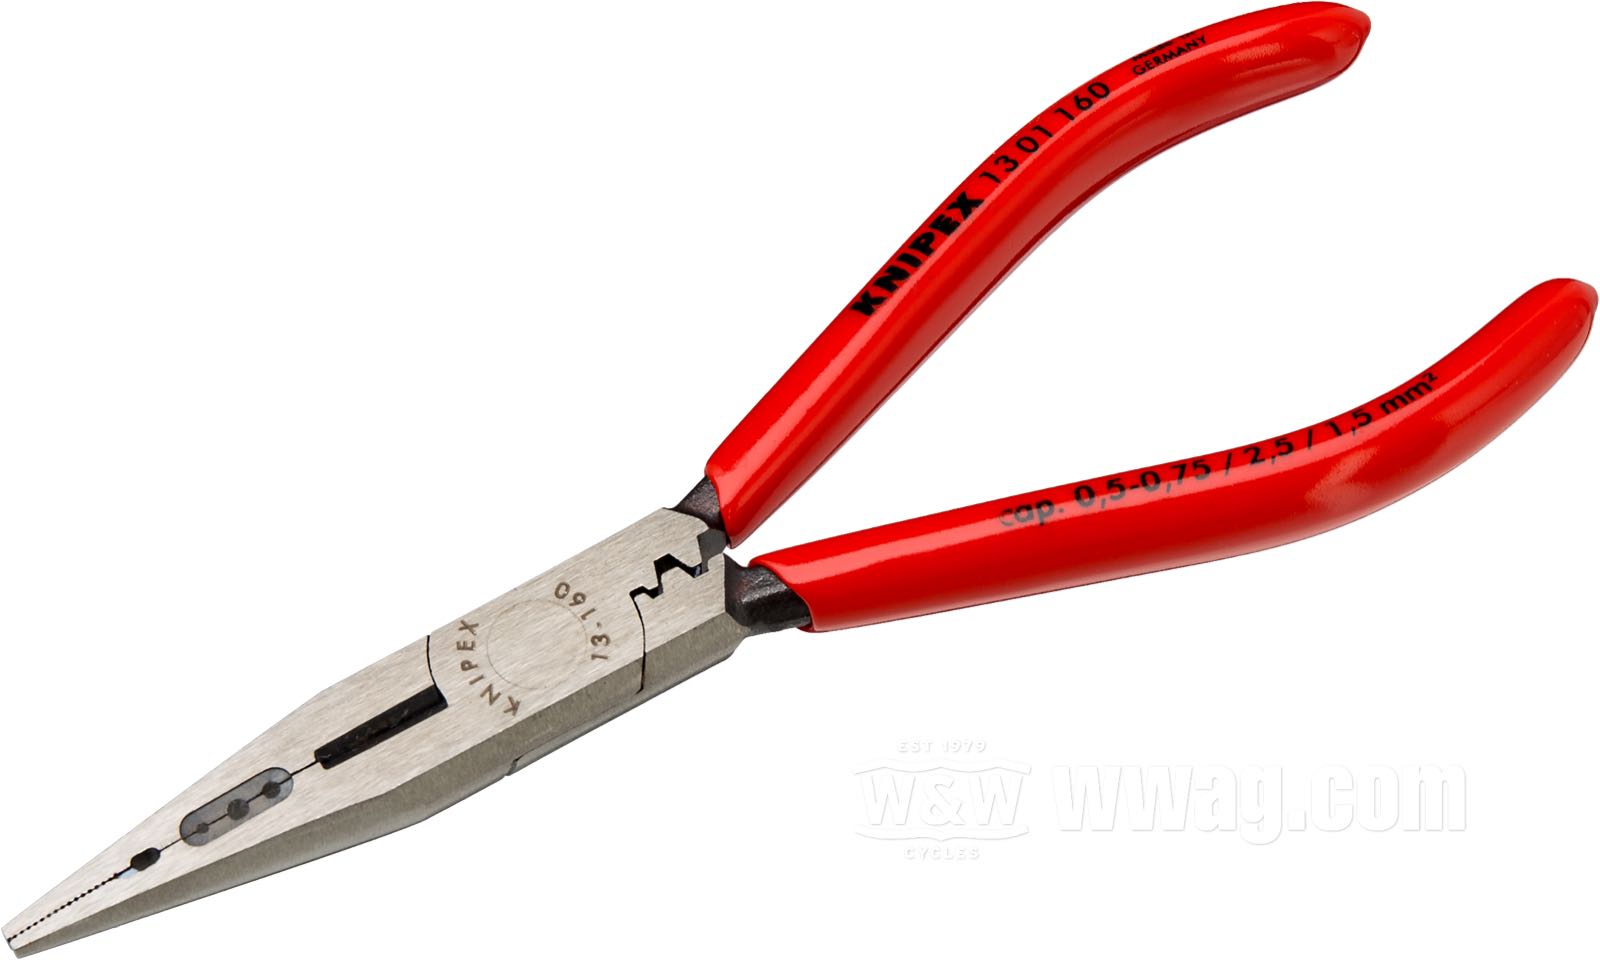 Pliers by Knipex